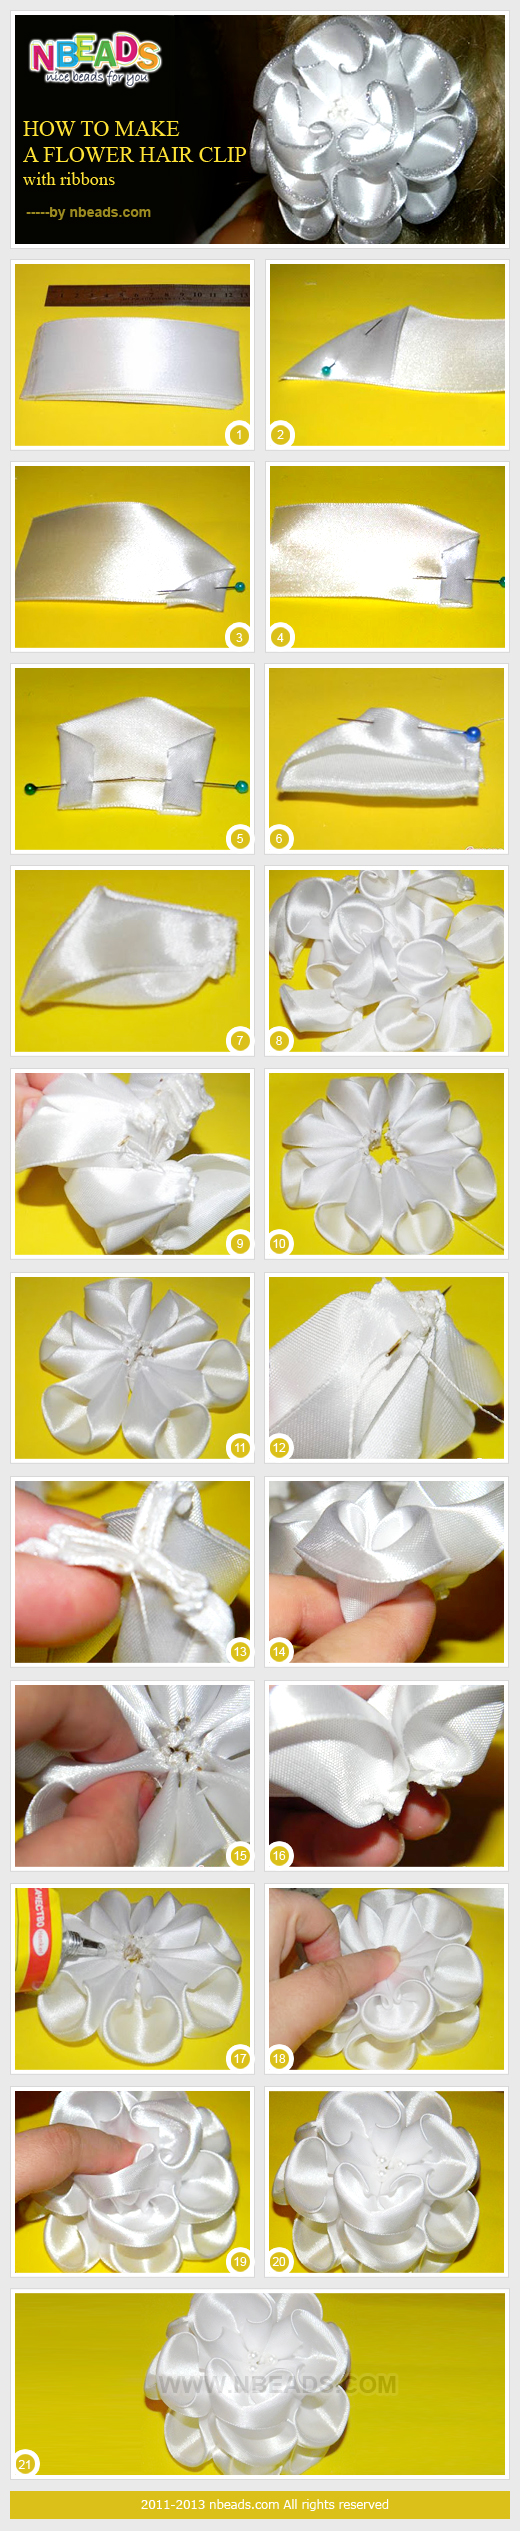 how to make a flower hair clip with ribbons